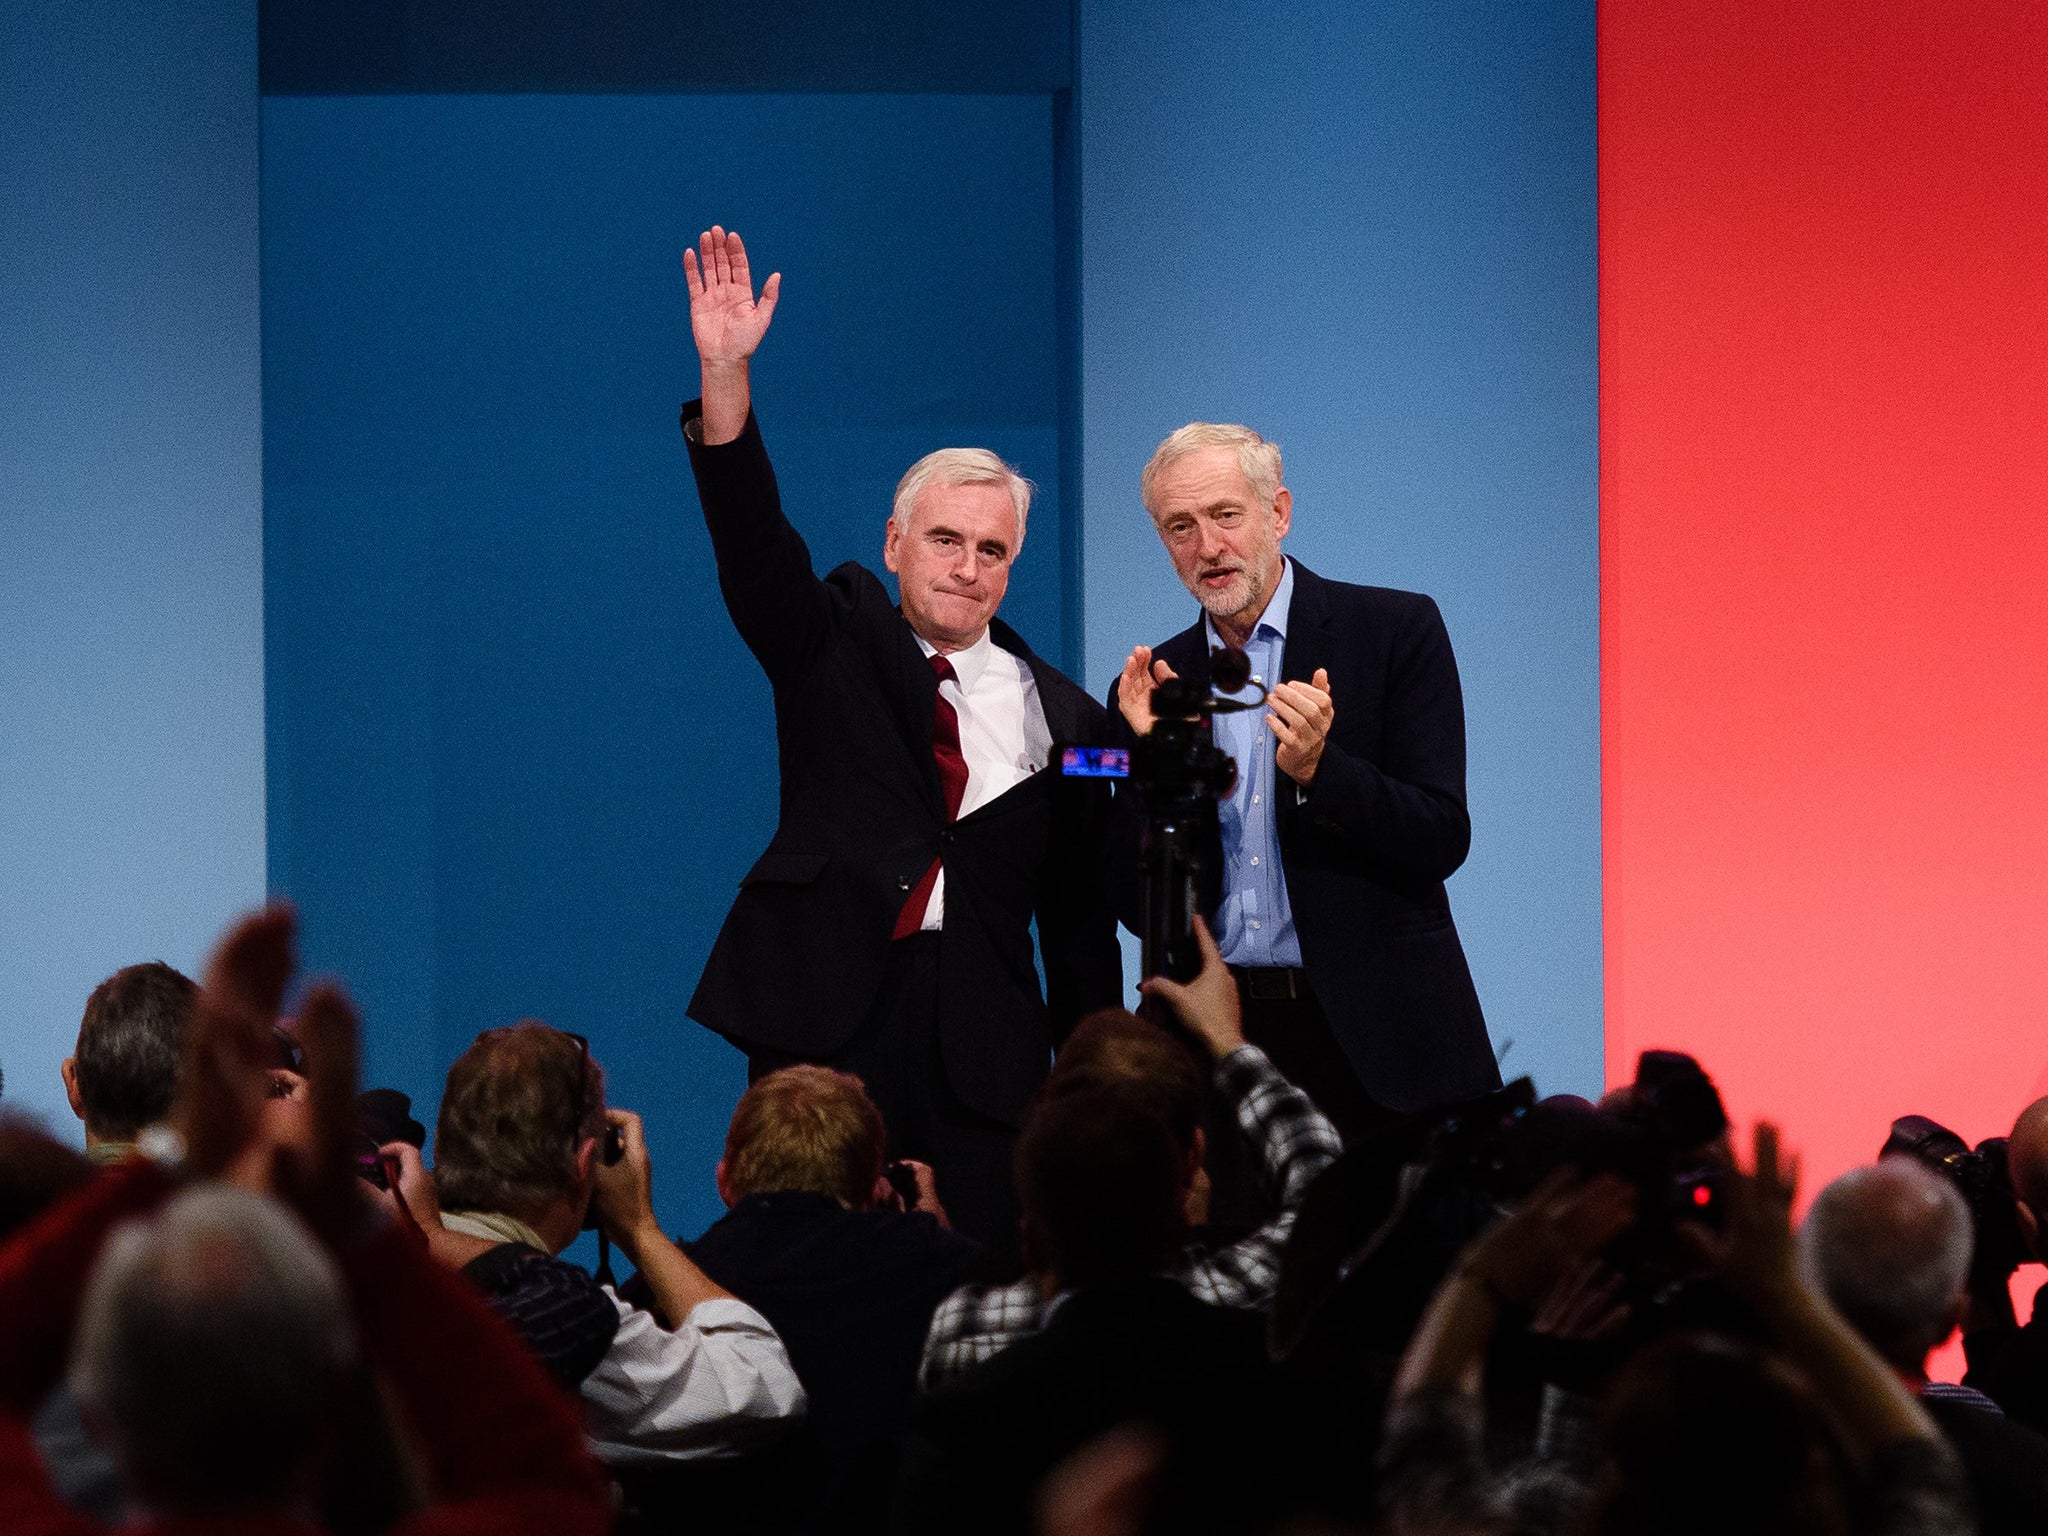 Jeremy Corbyn said during the leadership contest that he was interested in the idea of a “guaranteed social wage”